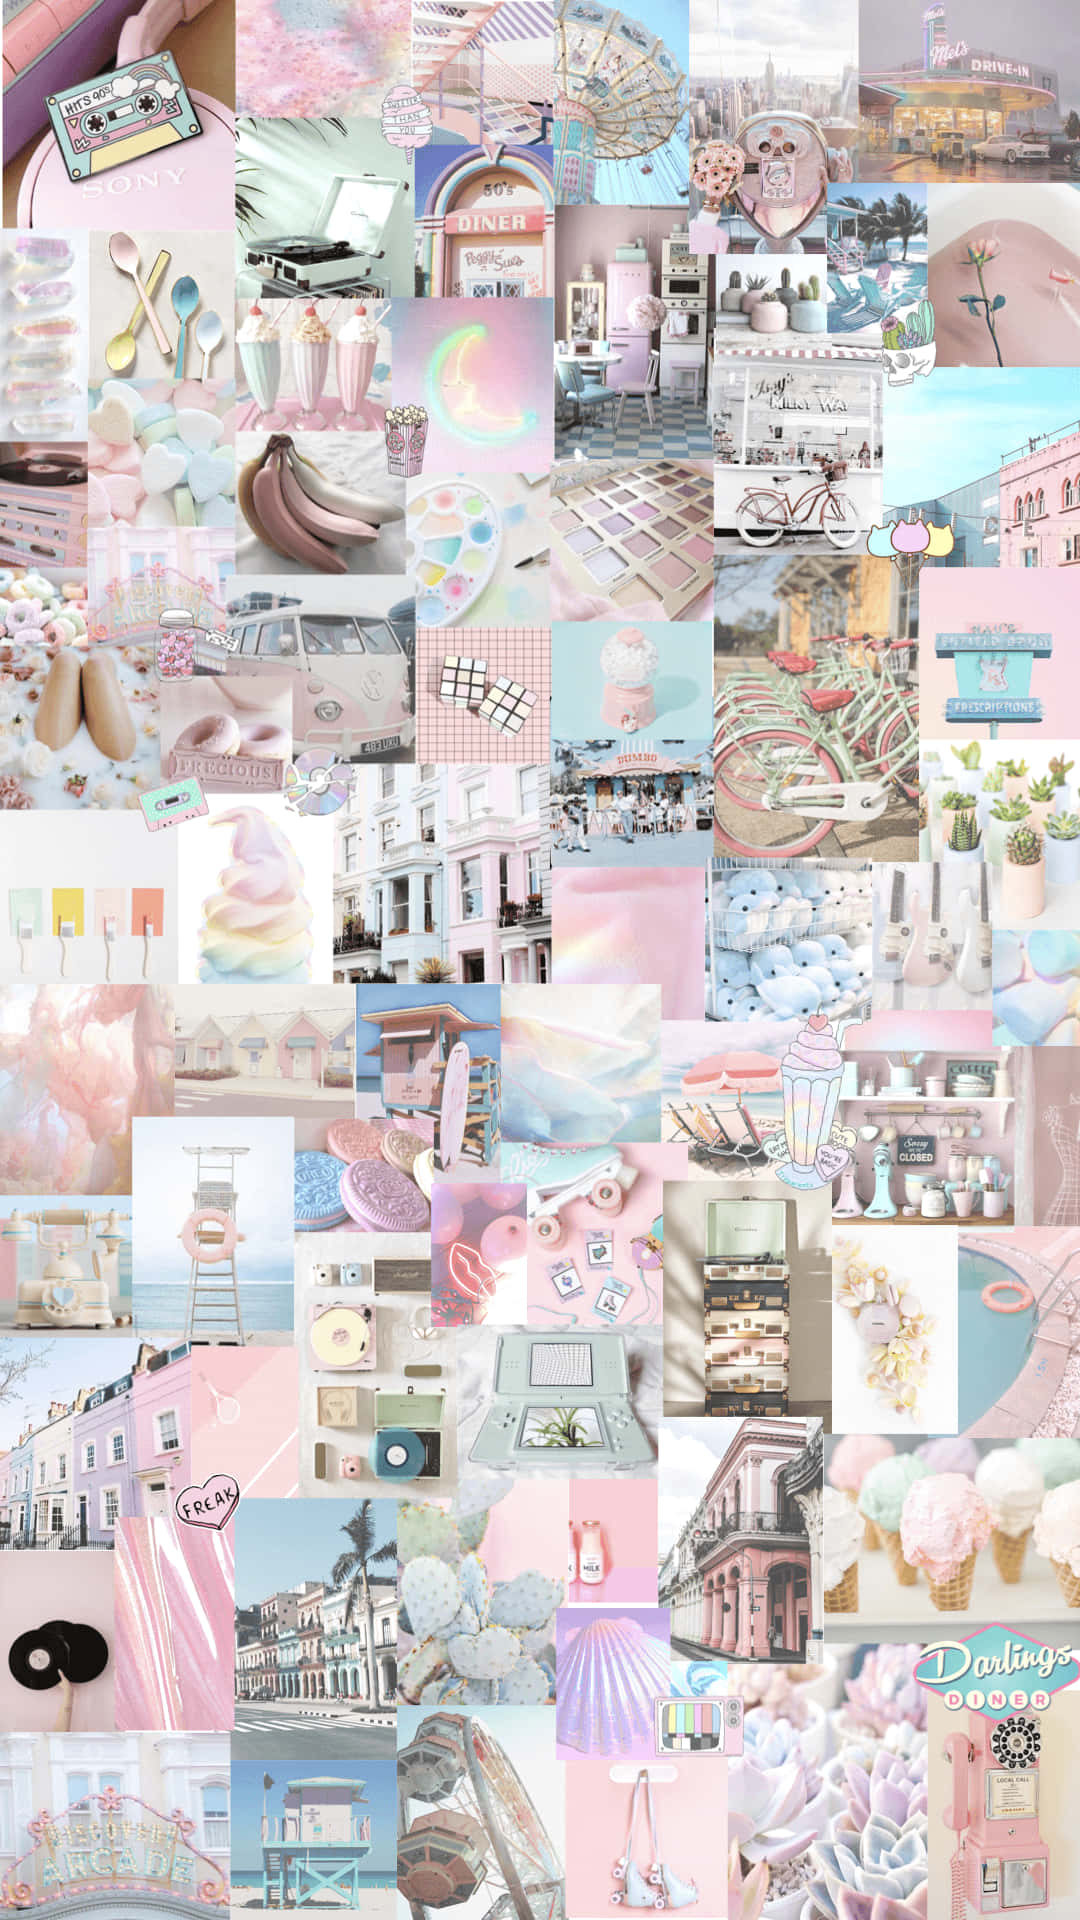 A stunning pink collage to enhance your home’s aesthetic. Wallpaper